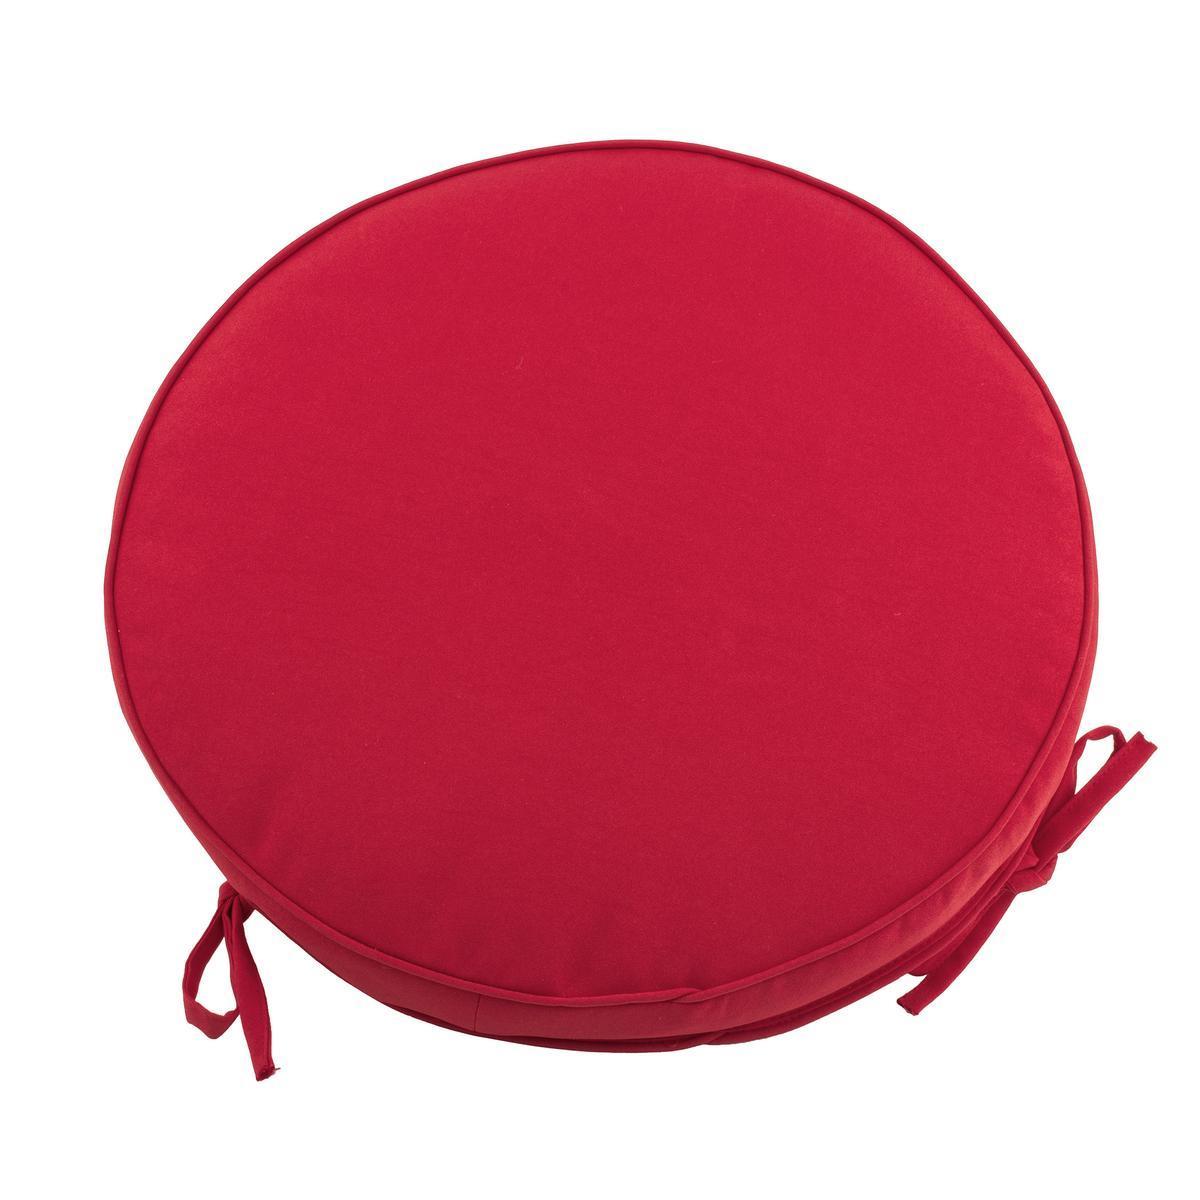 GAL. CHAISE RONDE IMPER ROUGE